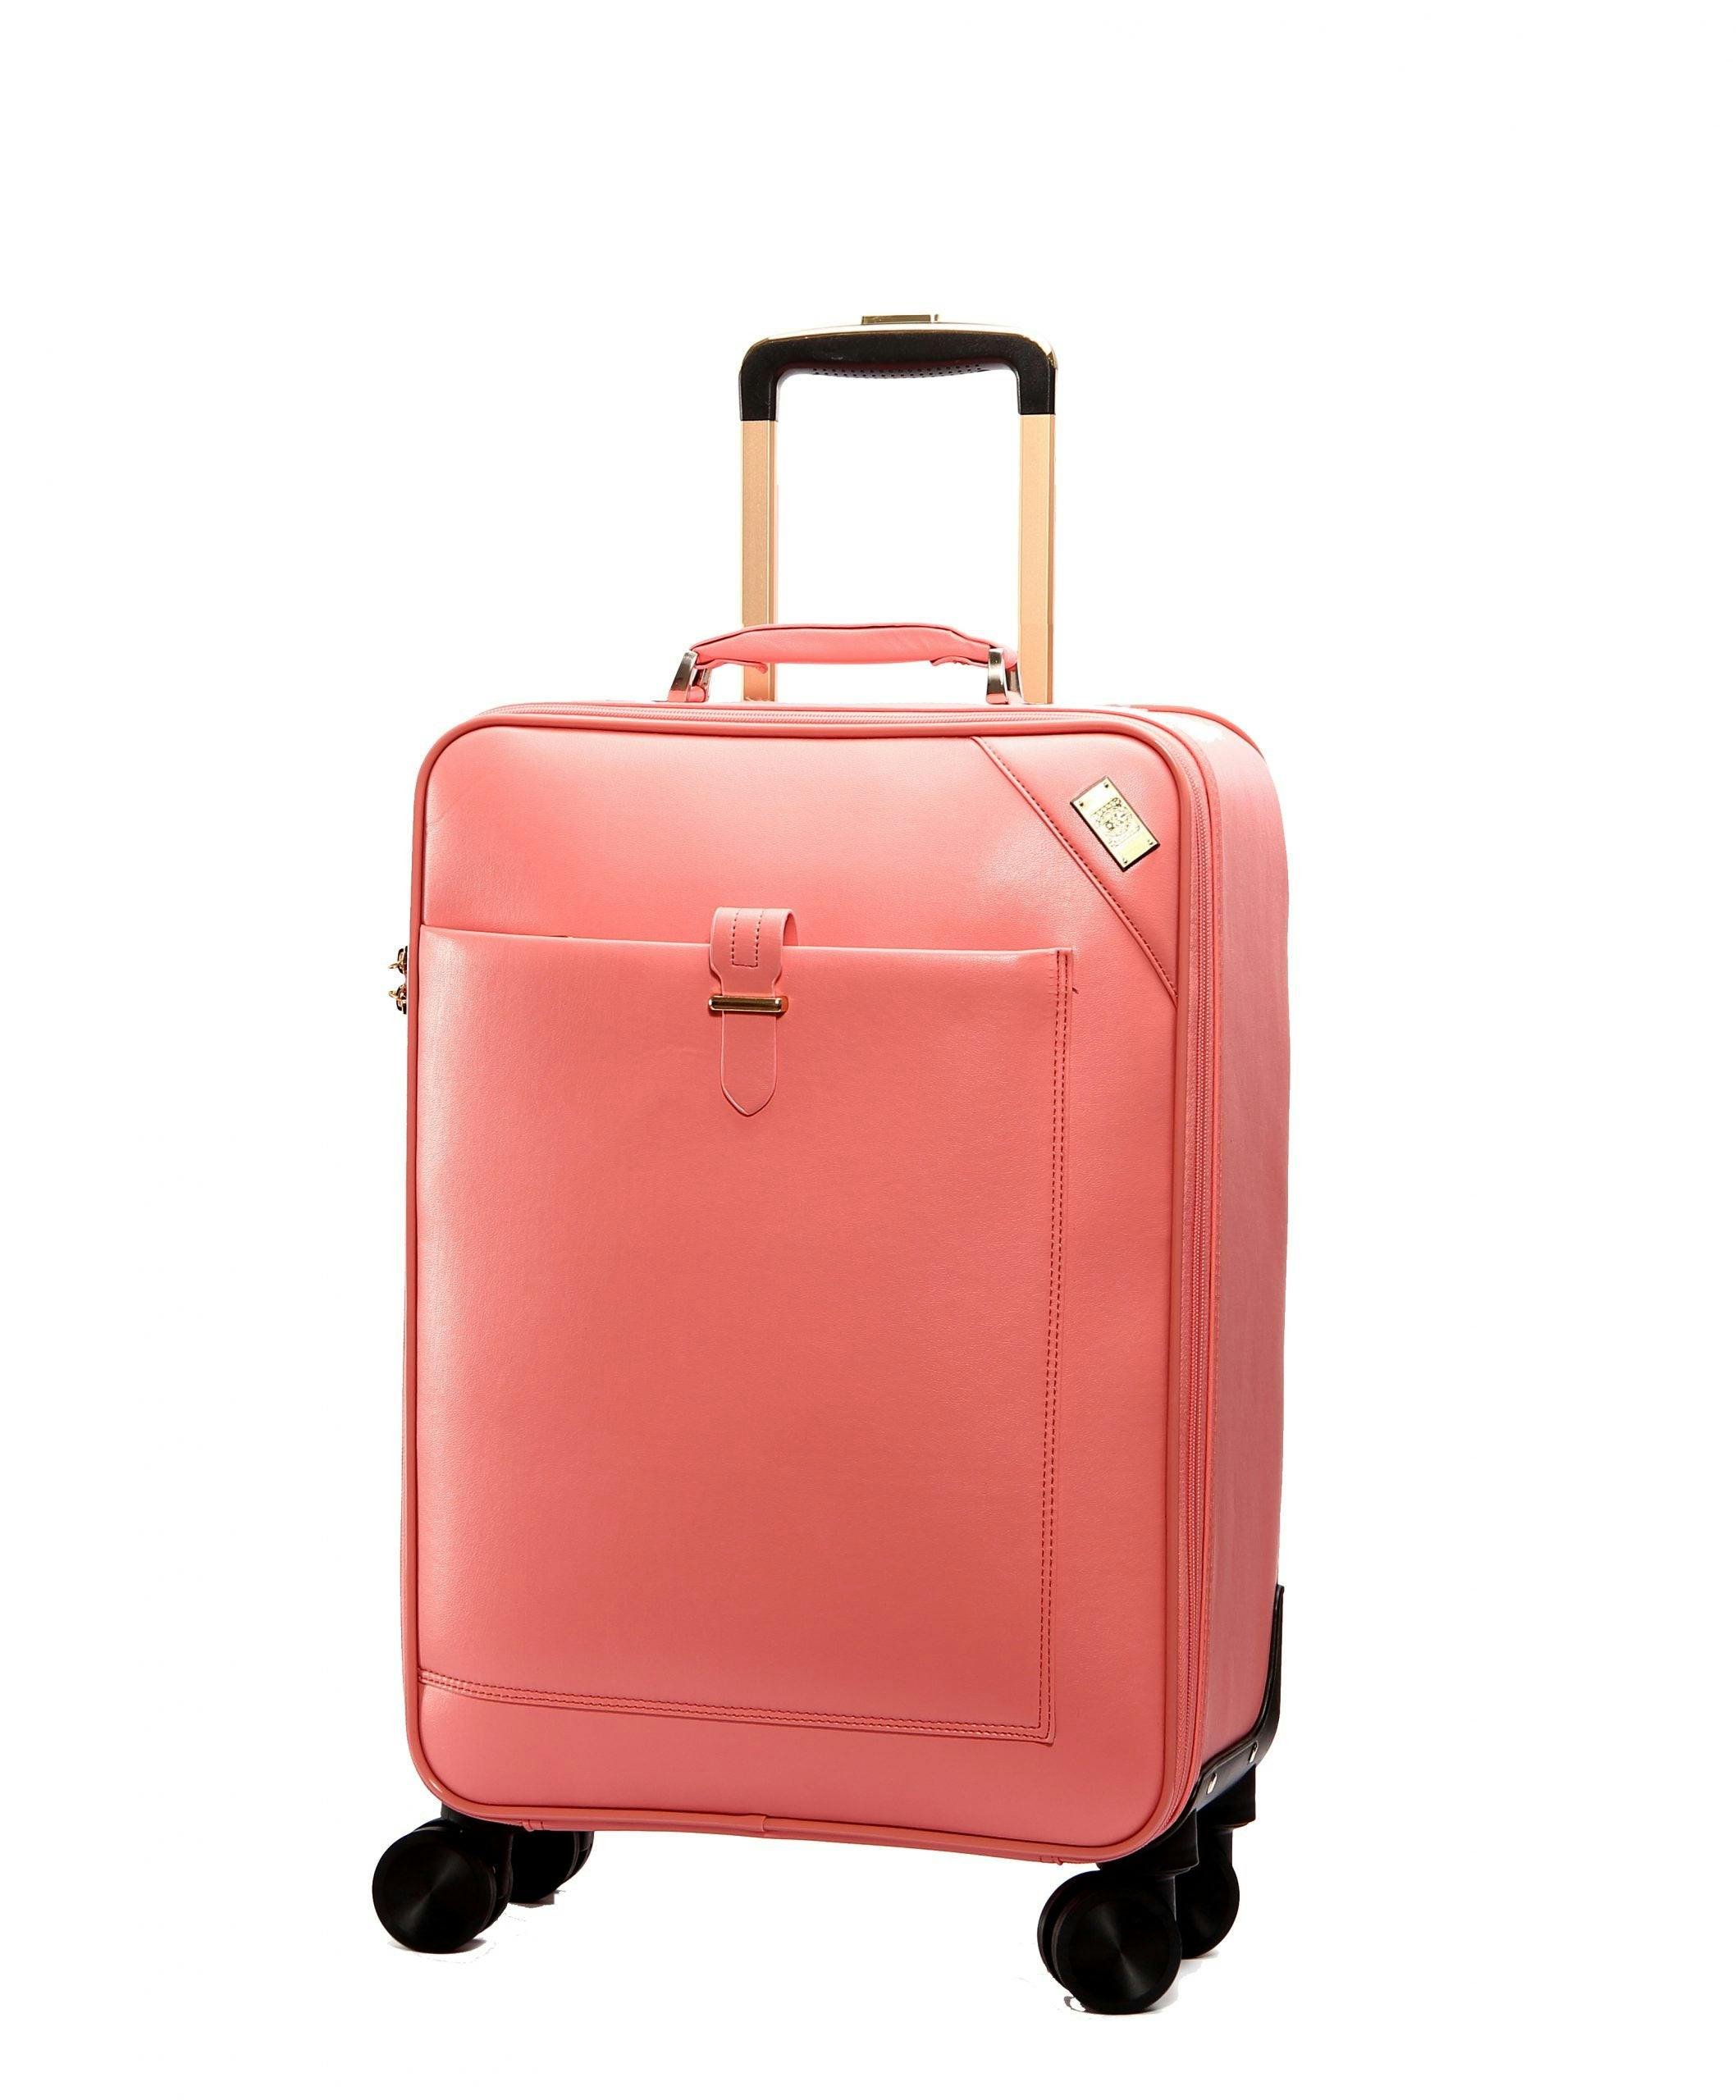 SEMMS LIGHT PINK LUXURIOUS LEATHER LUGGAGE